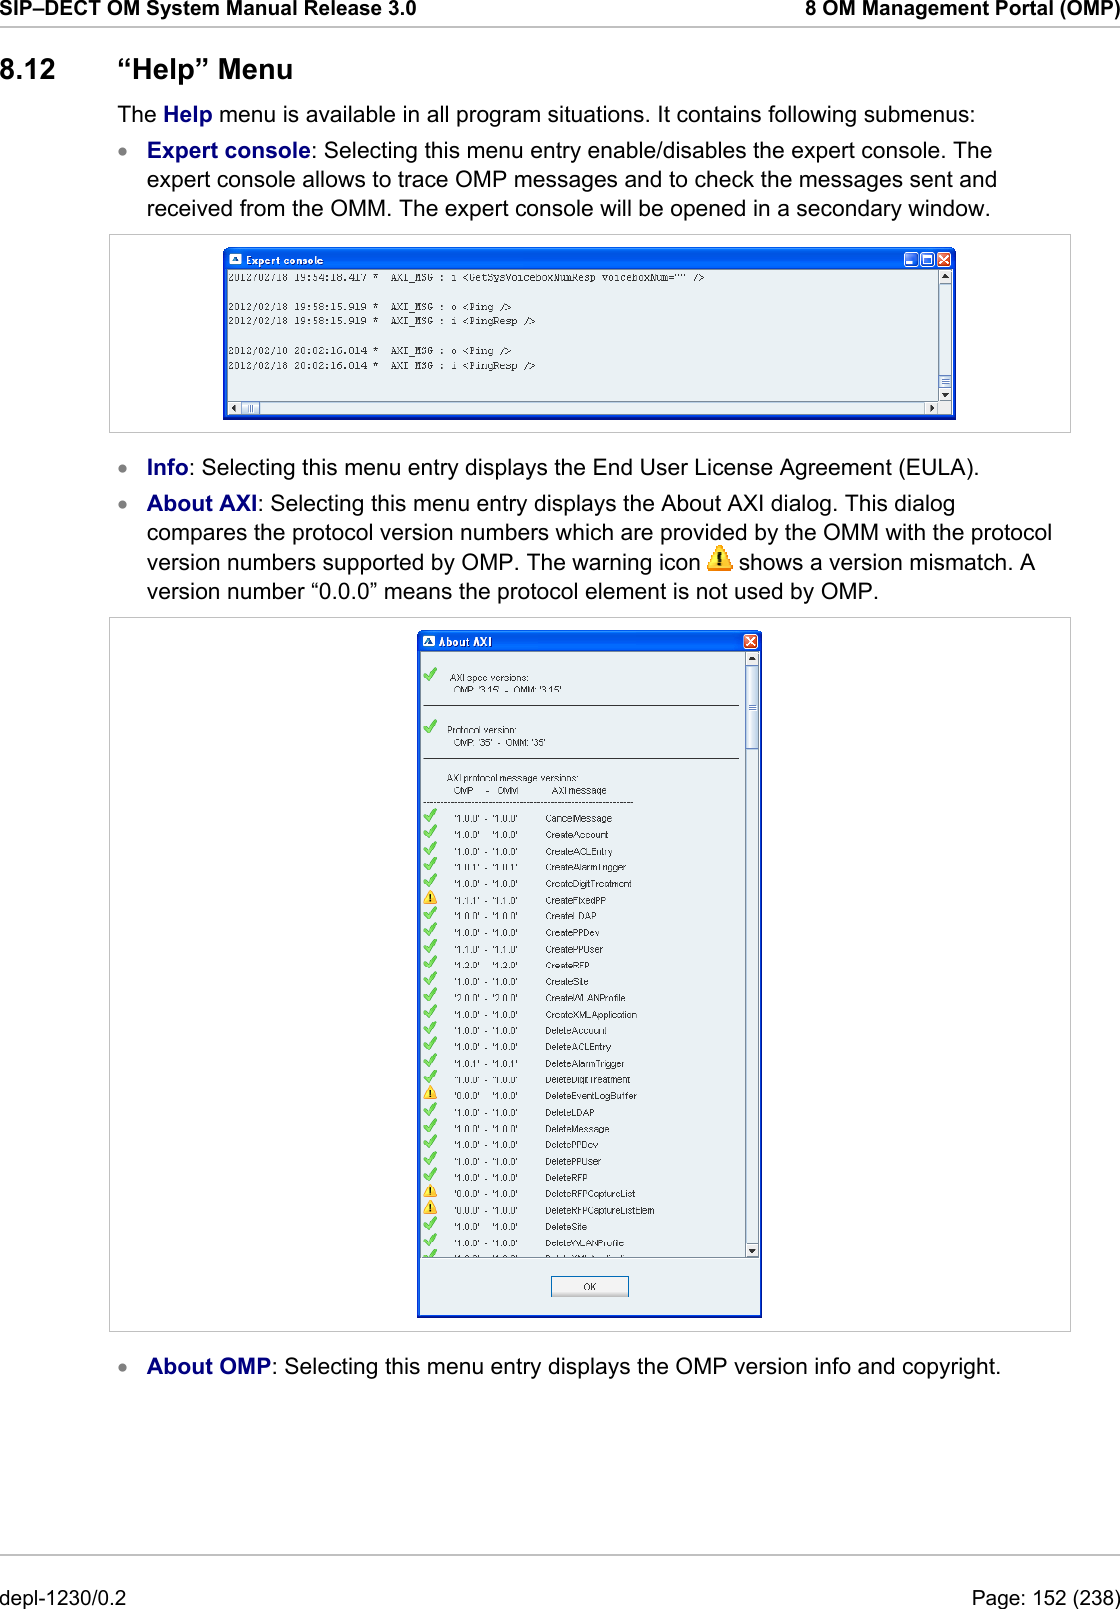 SIP–DECT OM System Manual Release 3.0  8 OM Management Portal (OMP) 8.12 “Help” Menu The Help menu is available in all program situations. It contains following submenus: Expert console: Selecting this menu entry enable/disables the expert console. The expert console allows to trace OMP messages and to check the messages sent and received from the OMM. The expert console will be opened in a secondary window.  •  • • Info: Selecting this menu entry displays the End User License Agreement (EULA). About AXI: Selecting this menu entry displays the About AXI dialog. This dialog compares the protocol version numbers which are provided by the OMM with the protocol version numbers supported by OMP. The warning icon   shows a version mismatch. A version number “0.0.0” means the protocol element is not used by OMP.  •  About OMP: Selecting this menu entry displays the OMP version info and copyright. depl-1230/0.2  Page: 152 (238) 